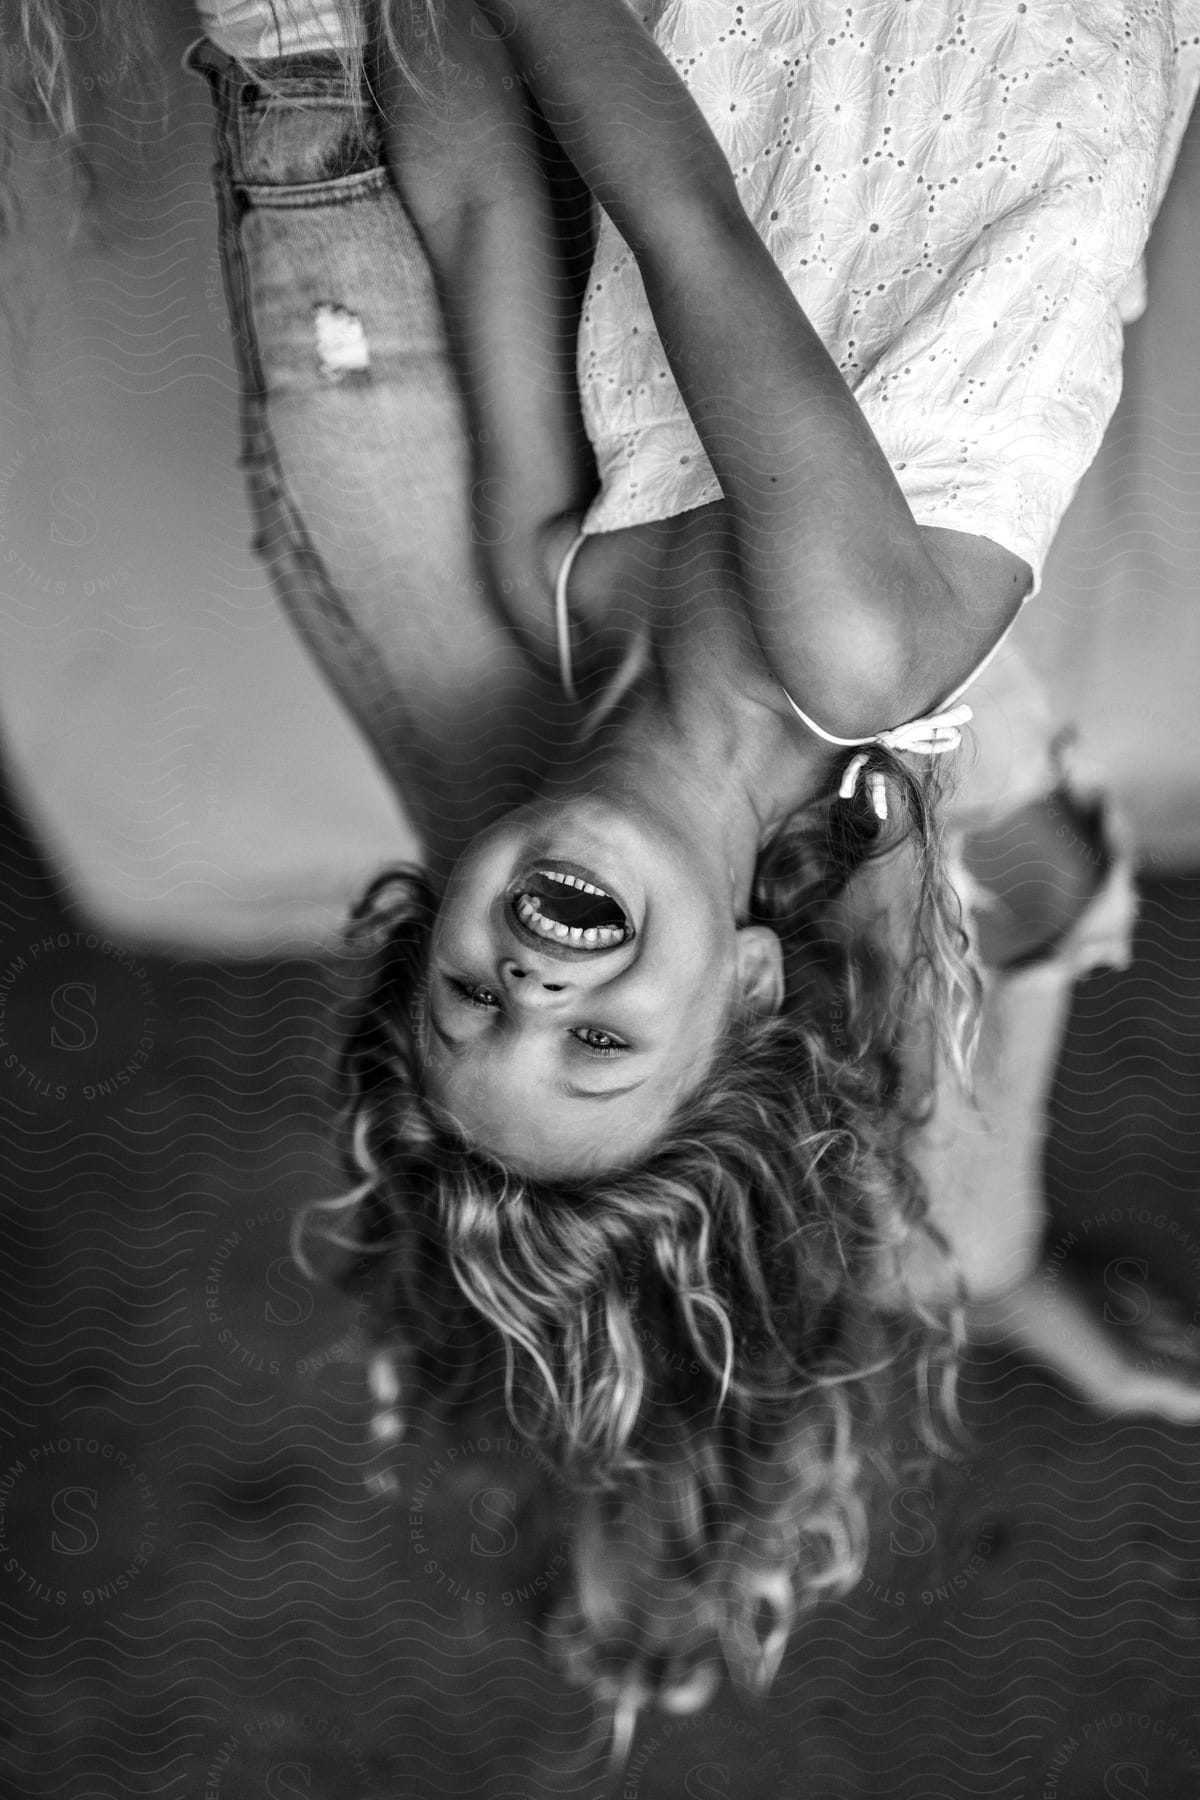 A little girl smiles and laughs as she hangs upside down with an adult behind her.